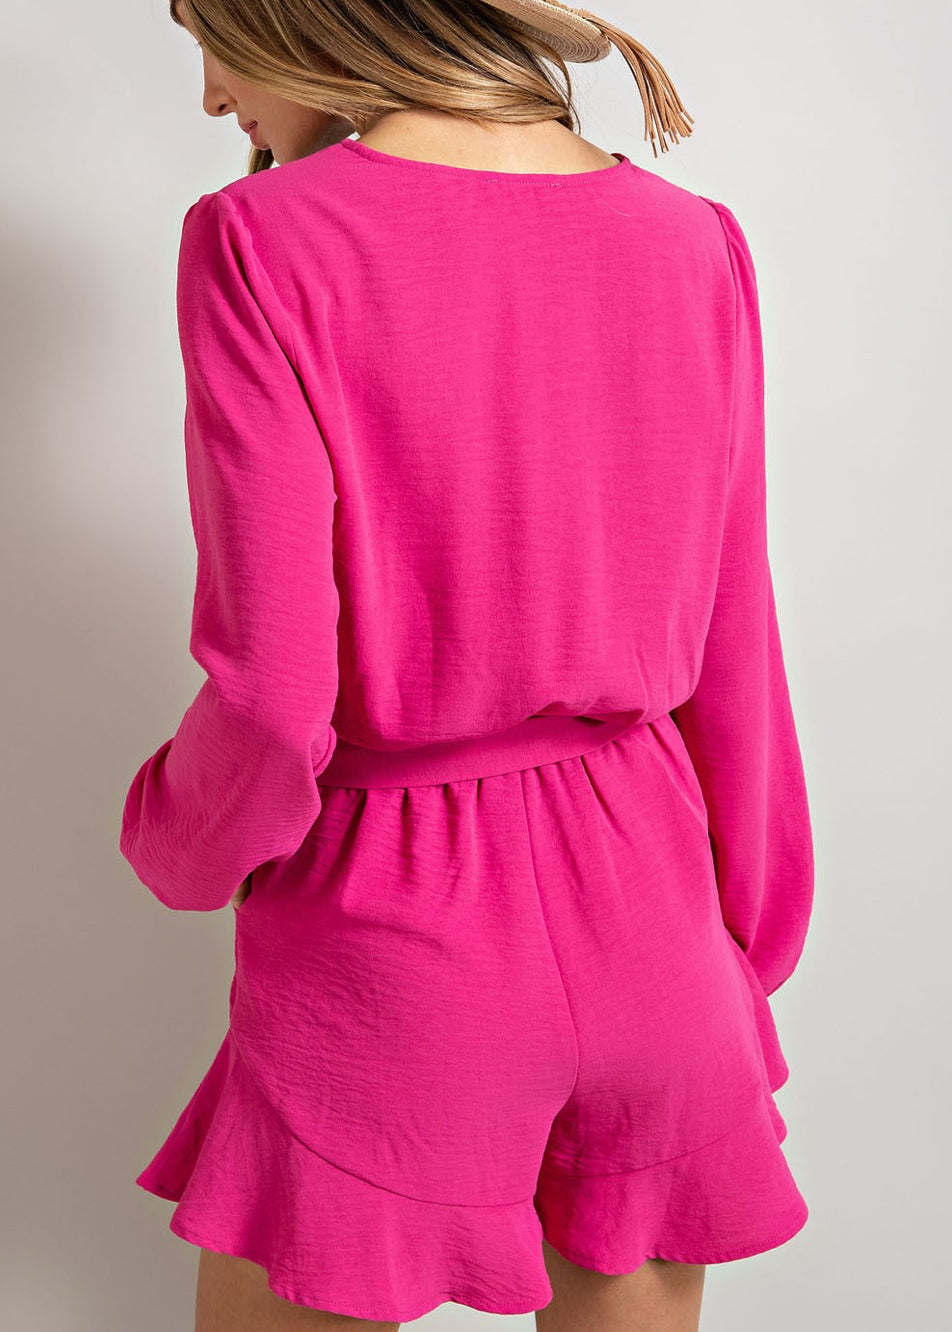 Hot Pink Frilly Romper - Jade Creek Boutique